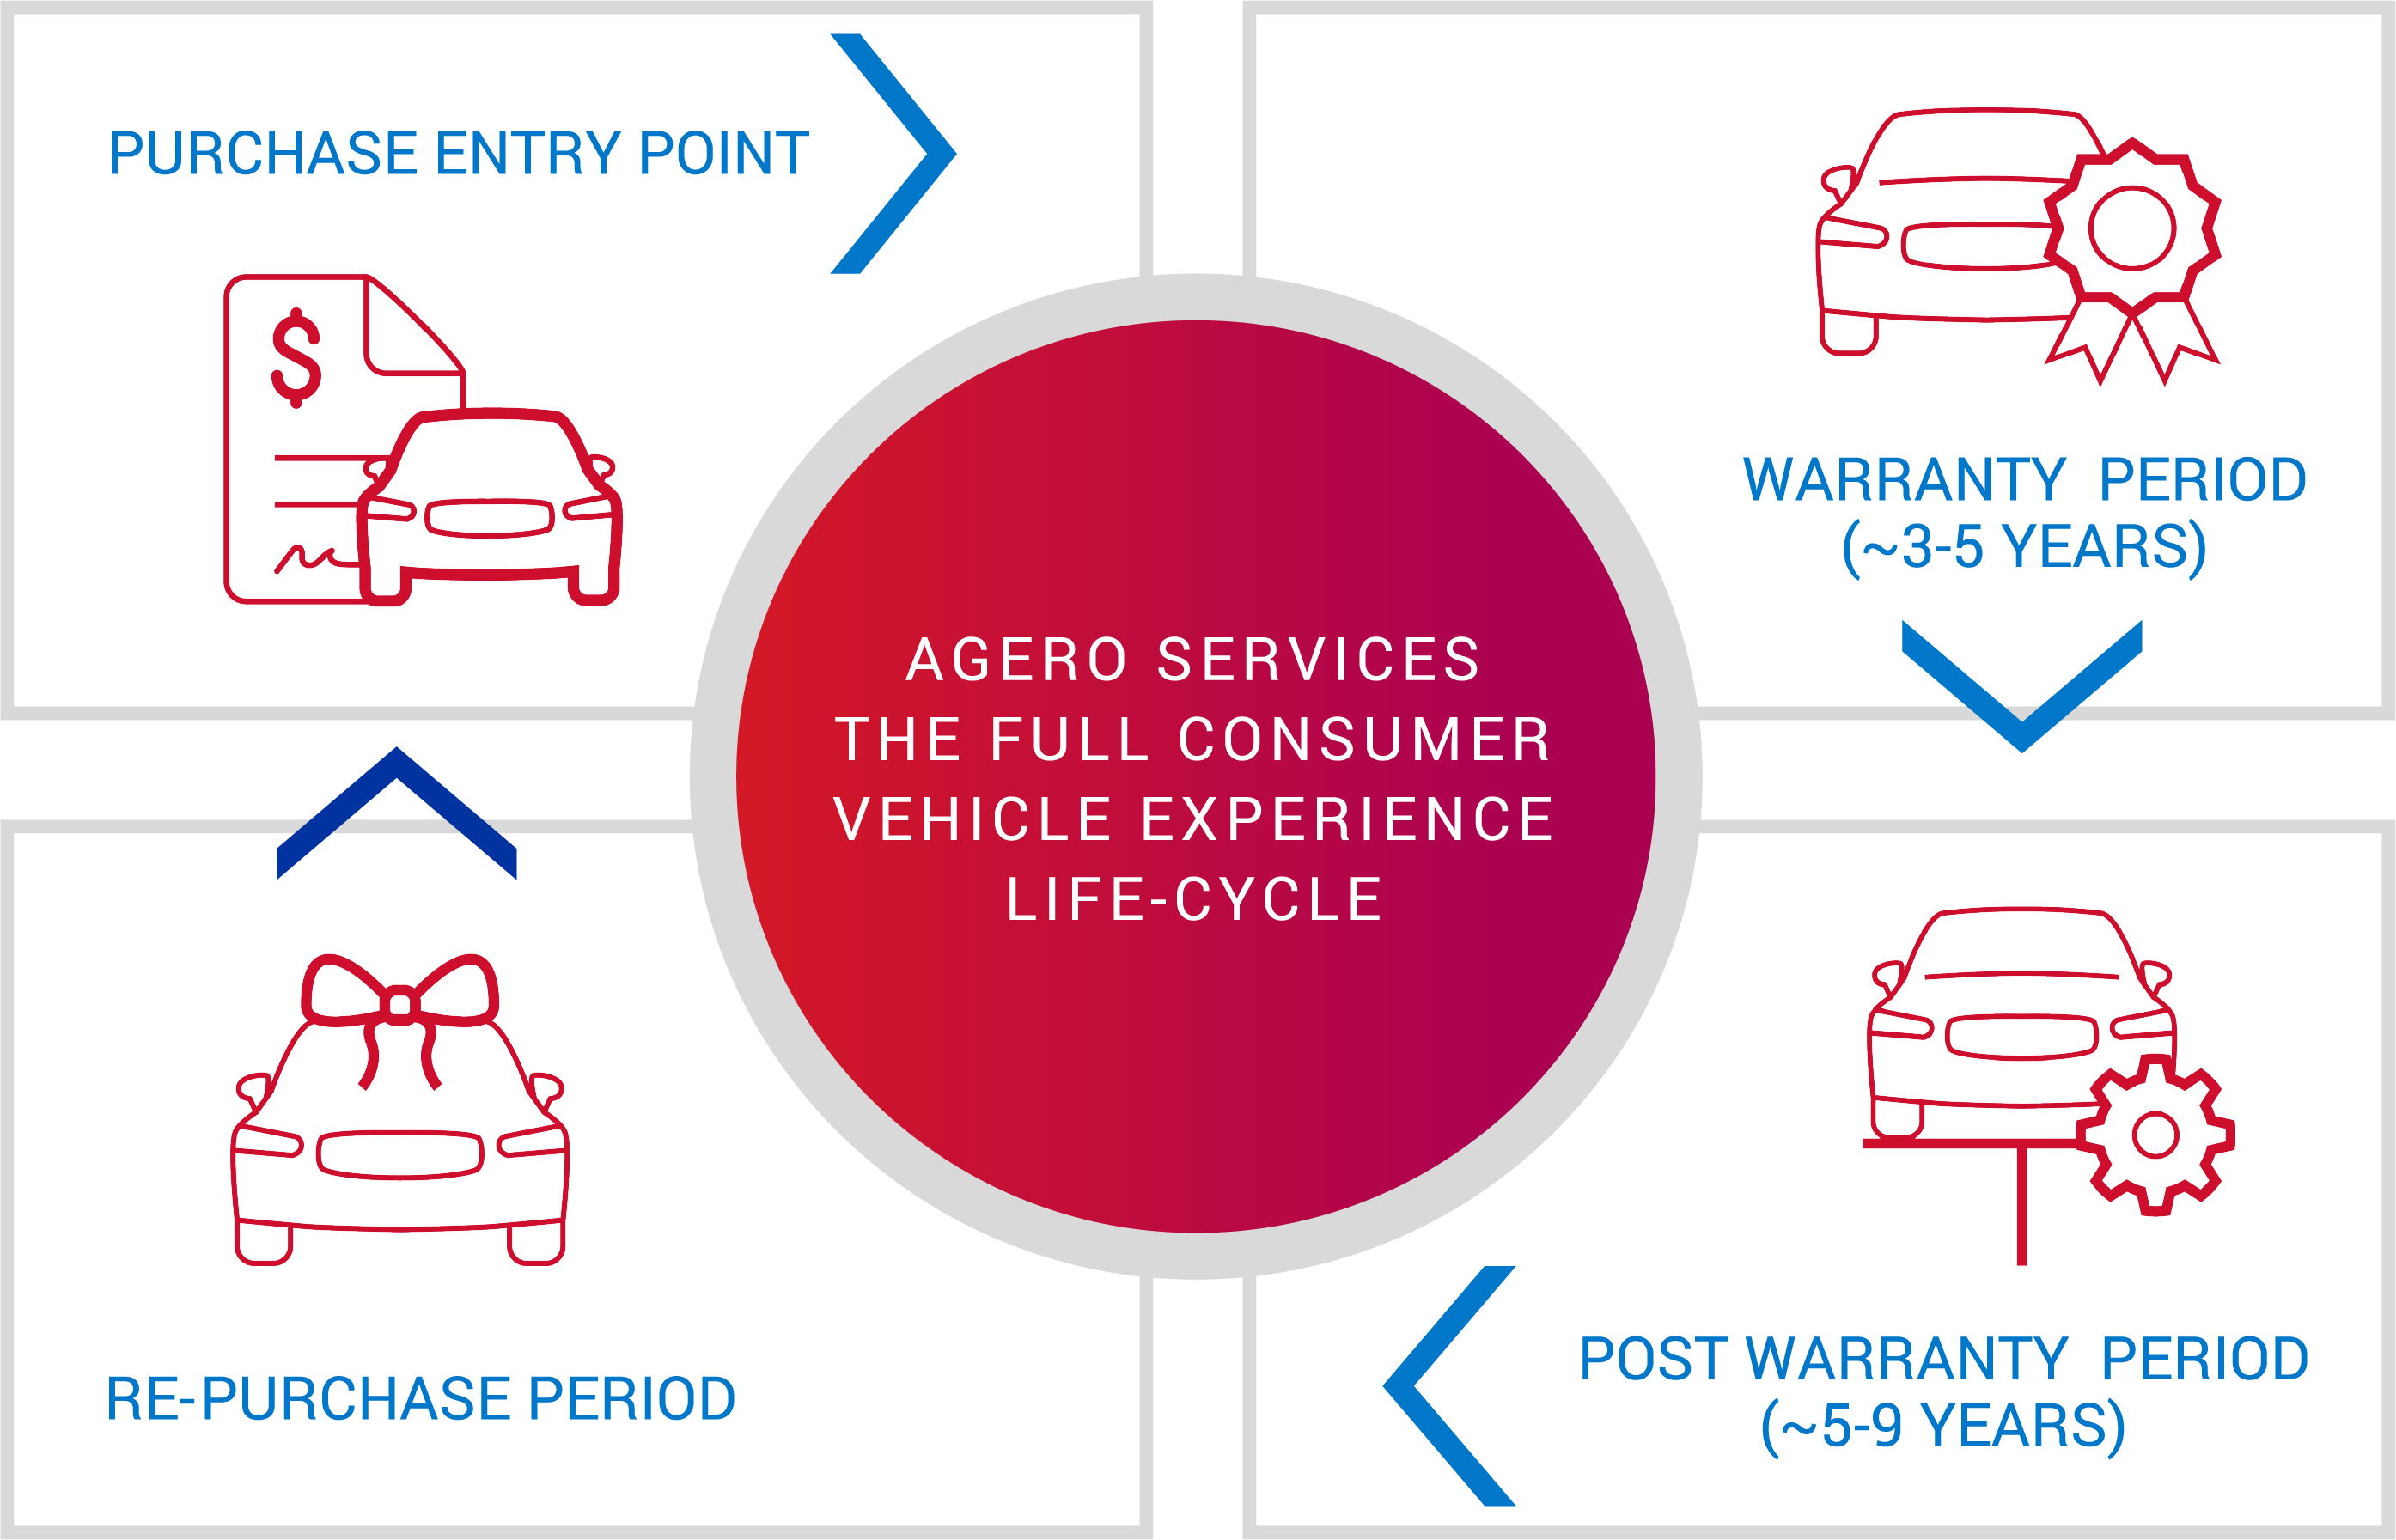 Agero Services the Full Consumer Vehicle Experience Life-Cycle with Outlines